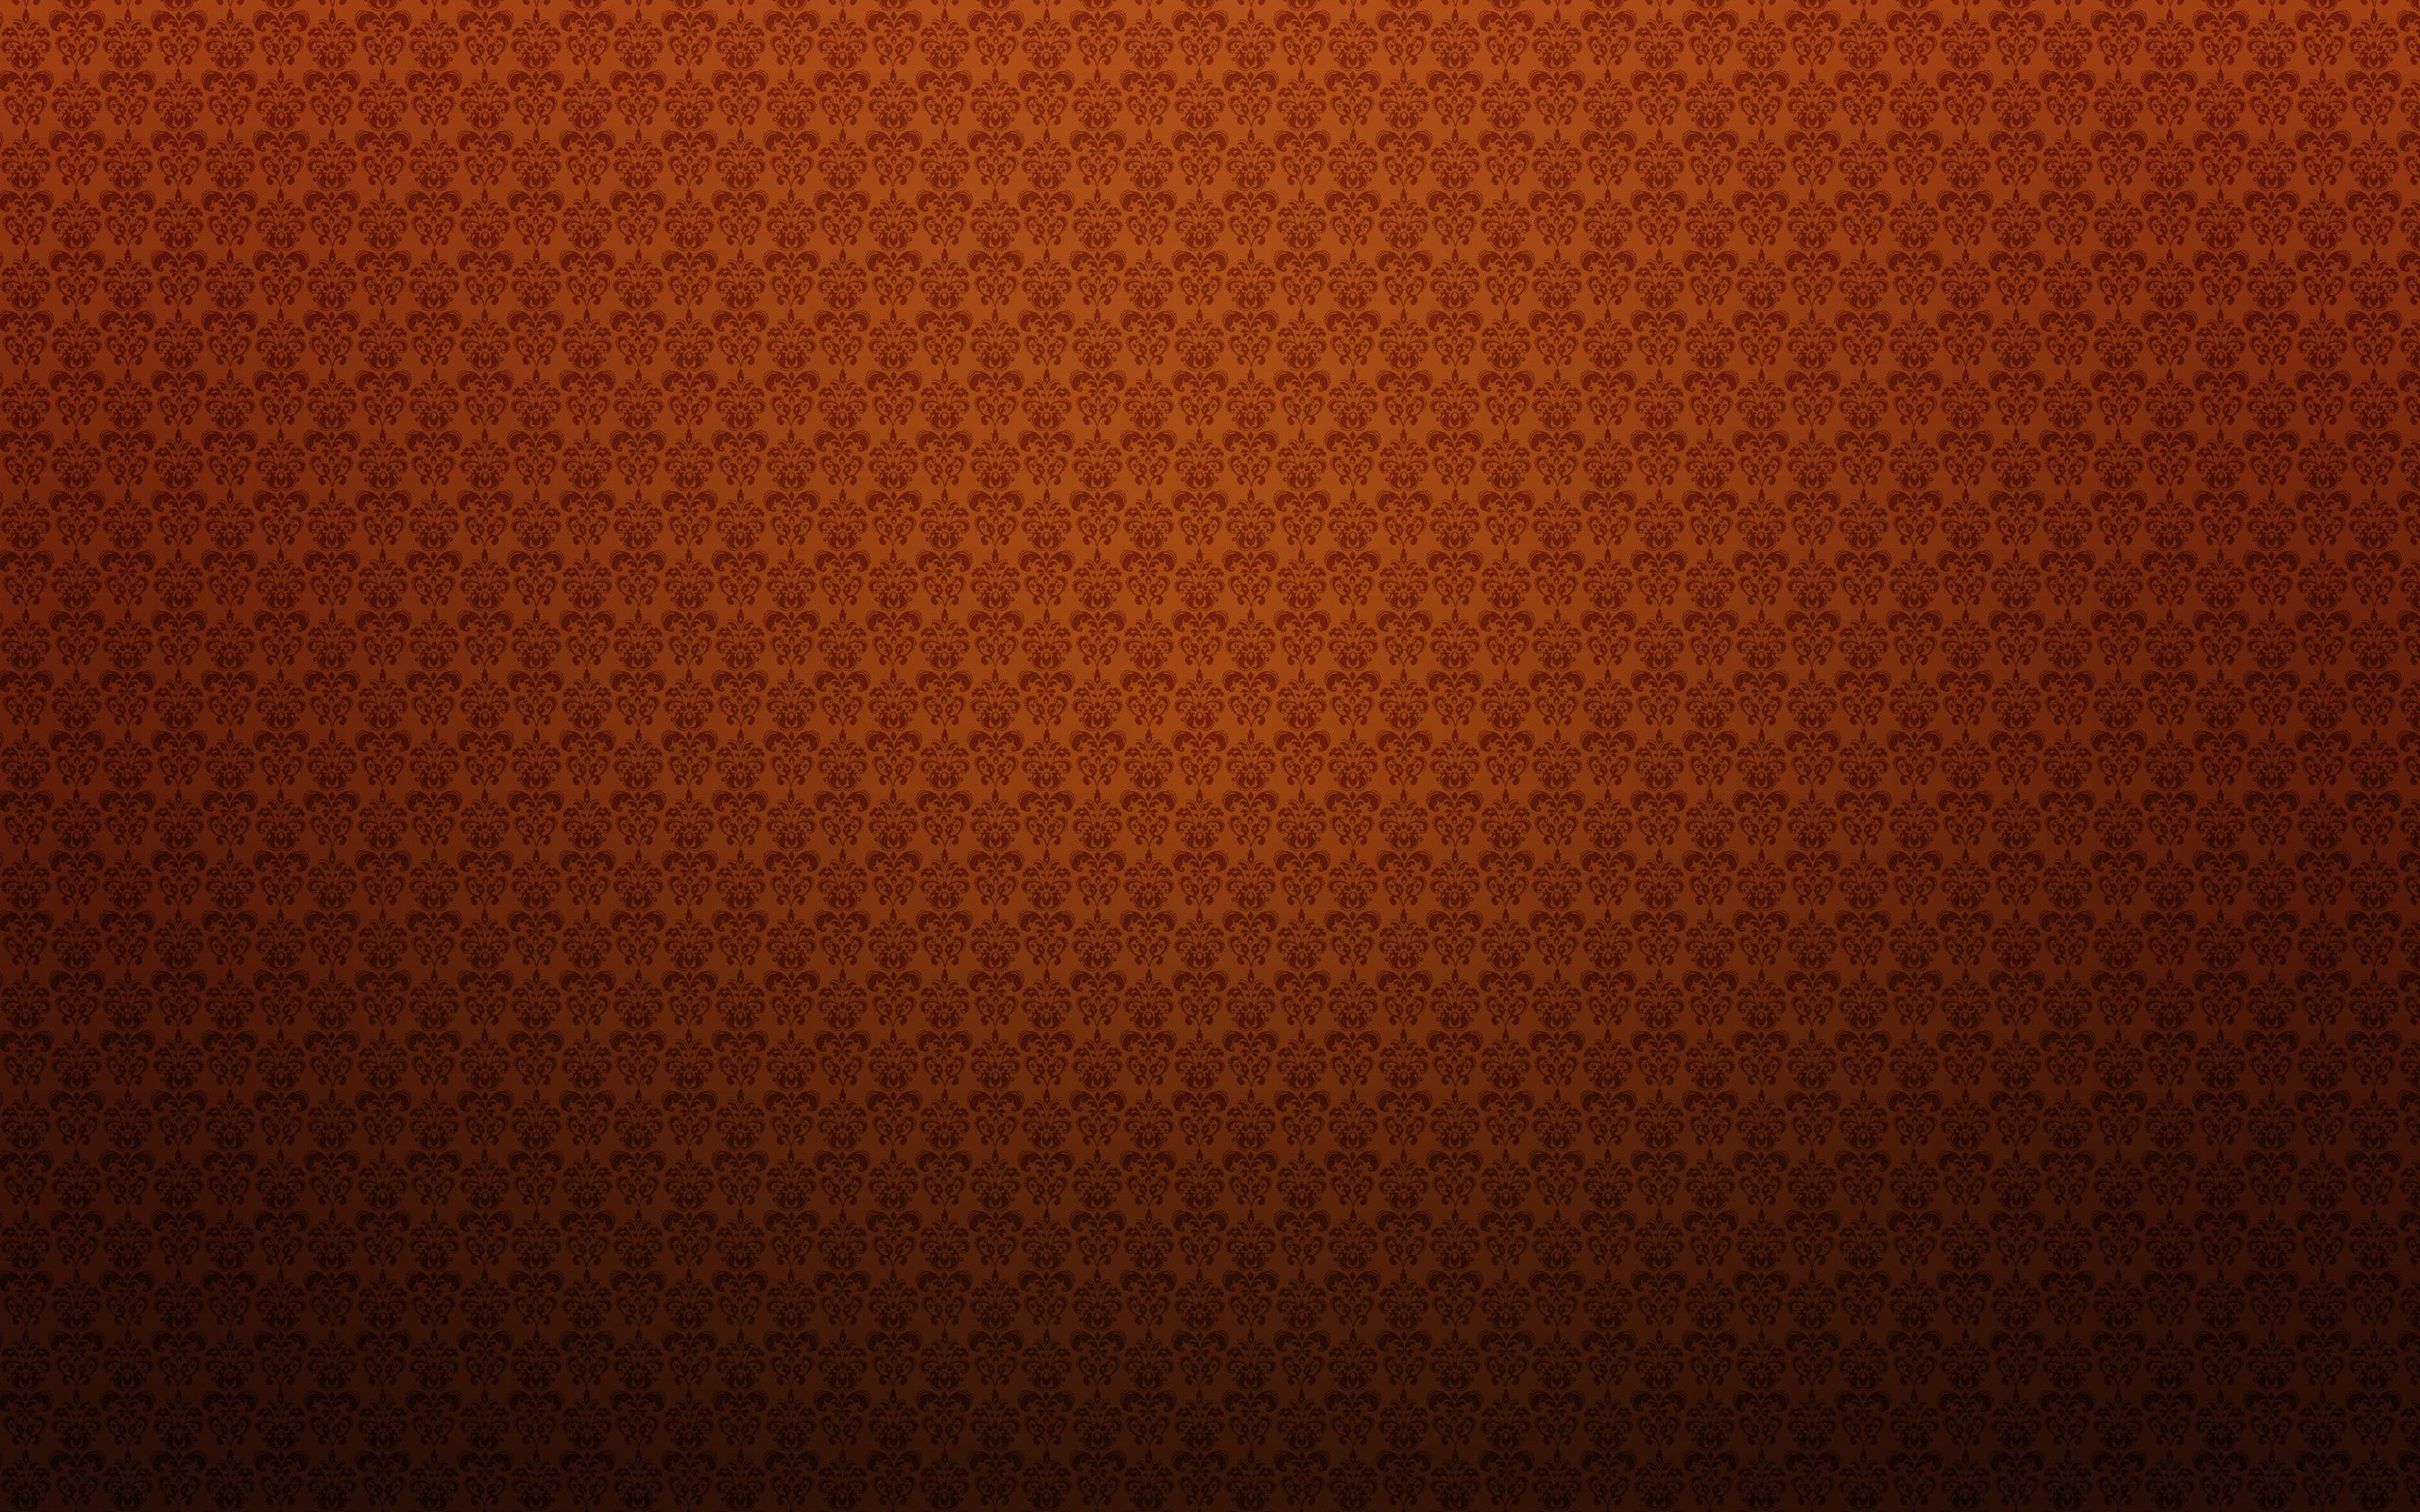 Orange Texture Background HD Wallpapers HD Backgrounds